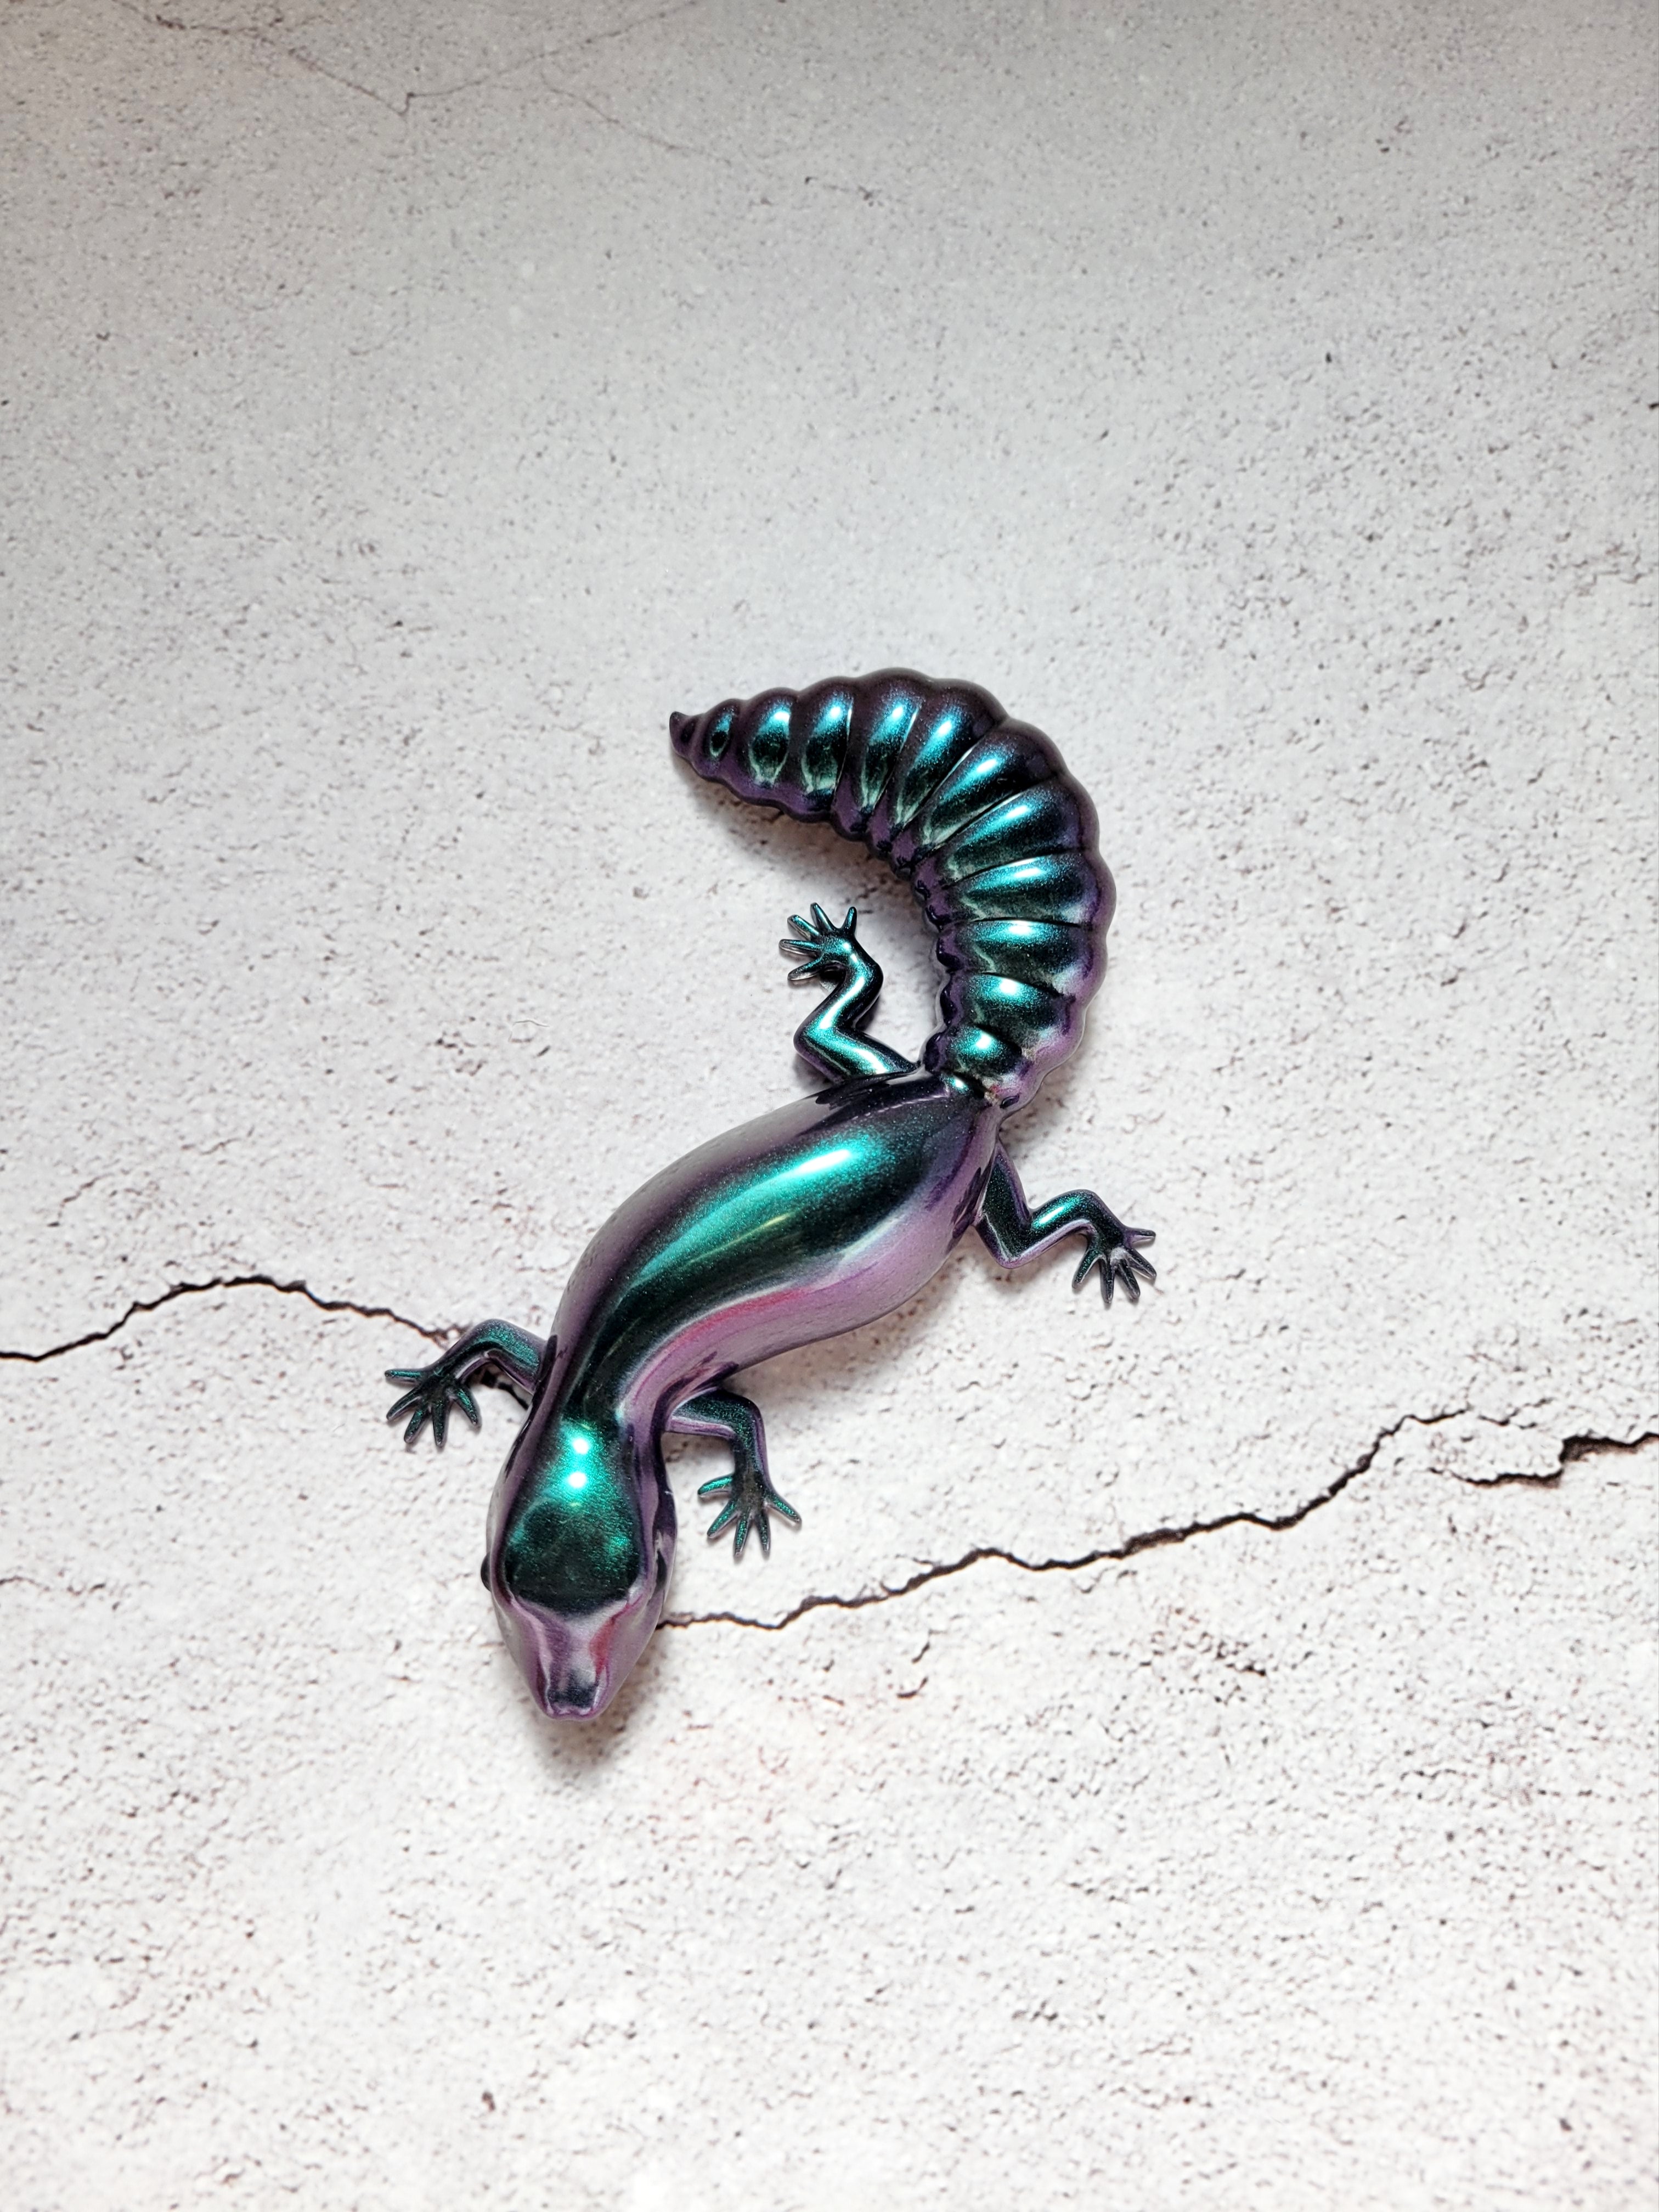 a resin made lizard in color shifting colors of shimmering blues, purples, greens. with black painted eyes. top view